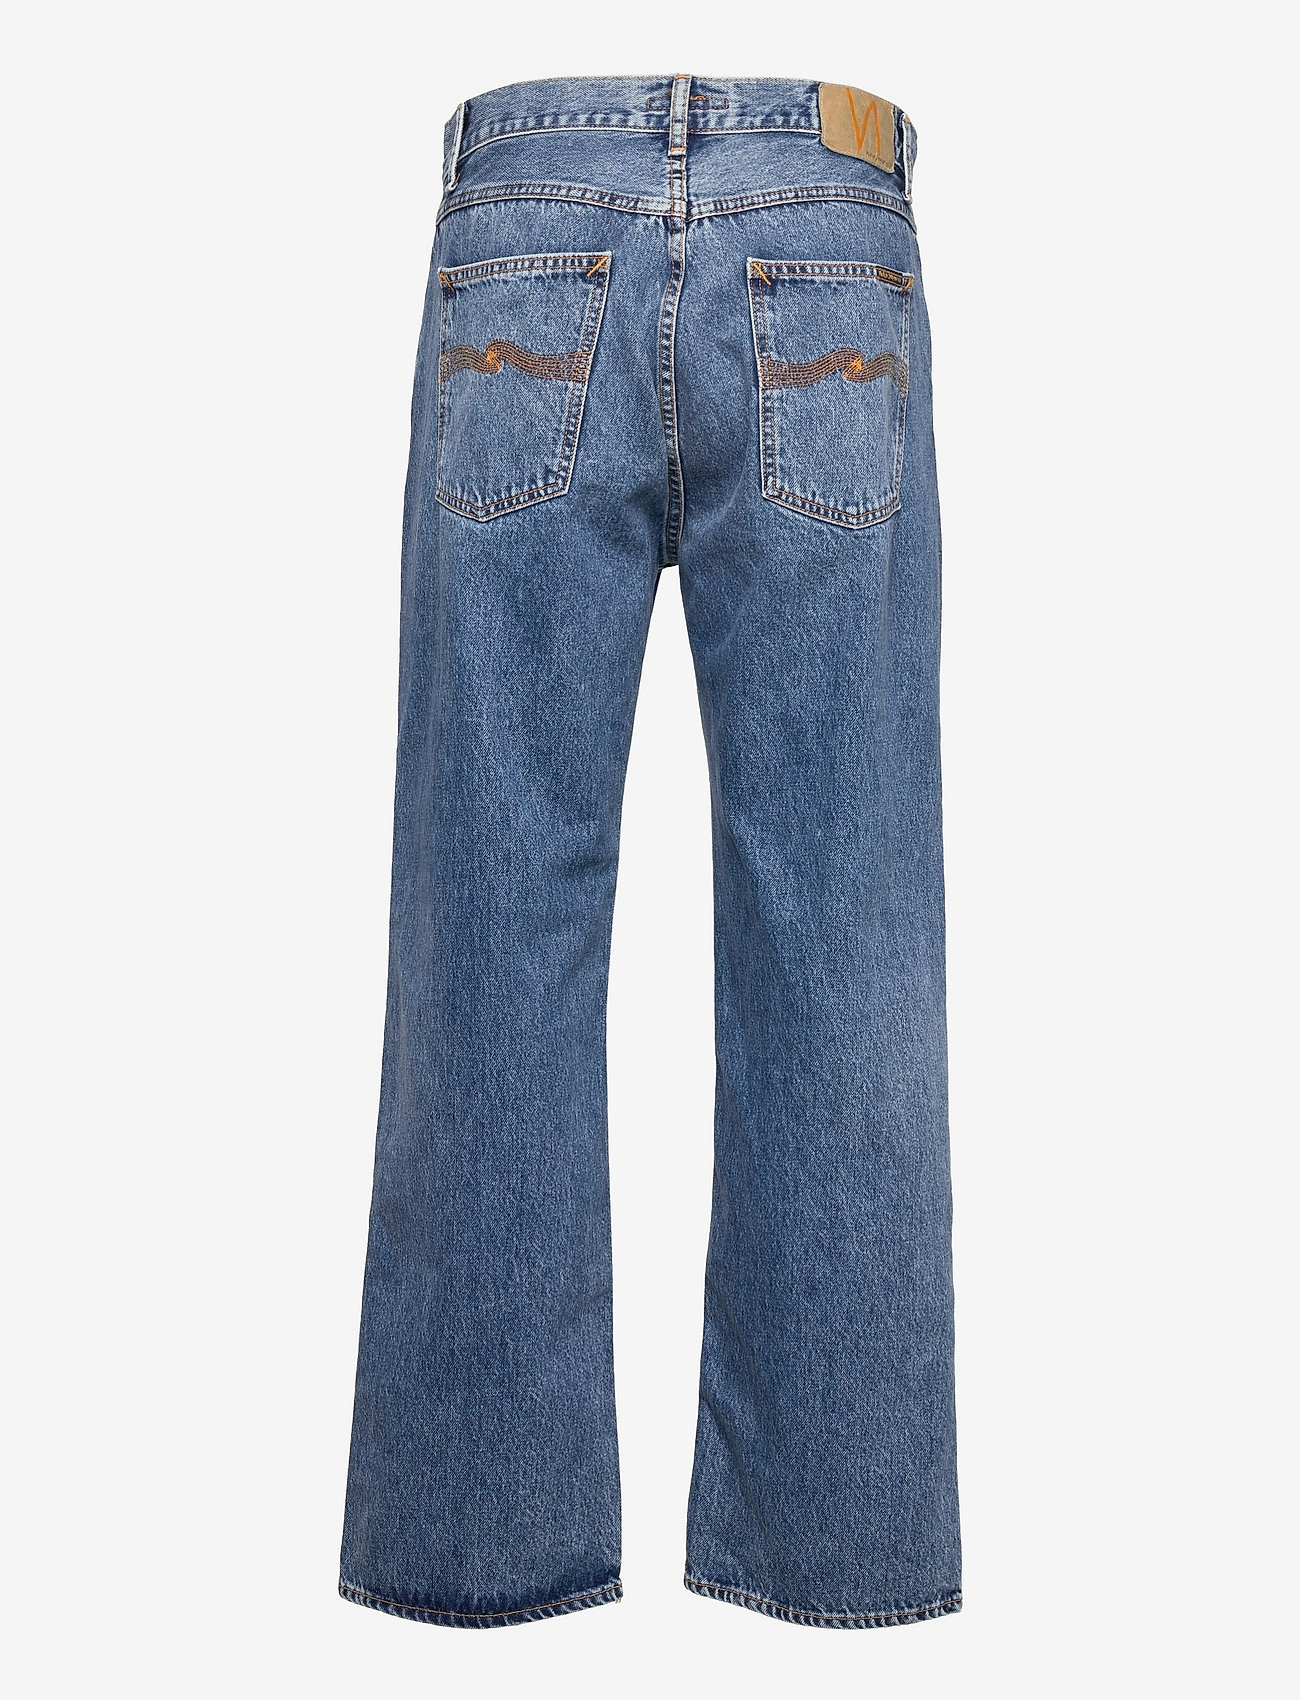 Nudie Jeans - Tuff Tony - relaxed jeans - indigo travel - 2